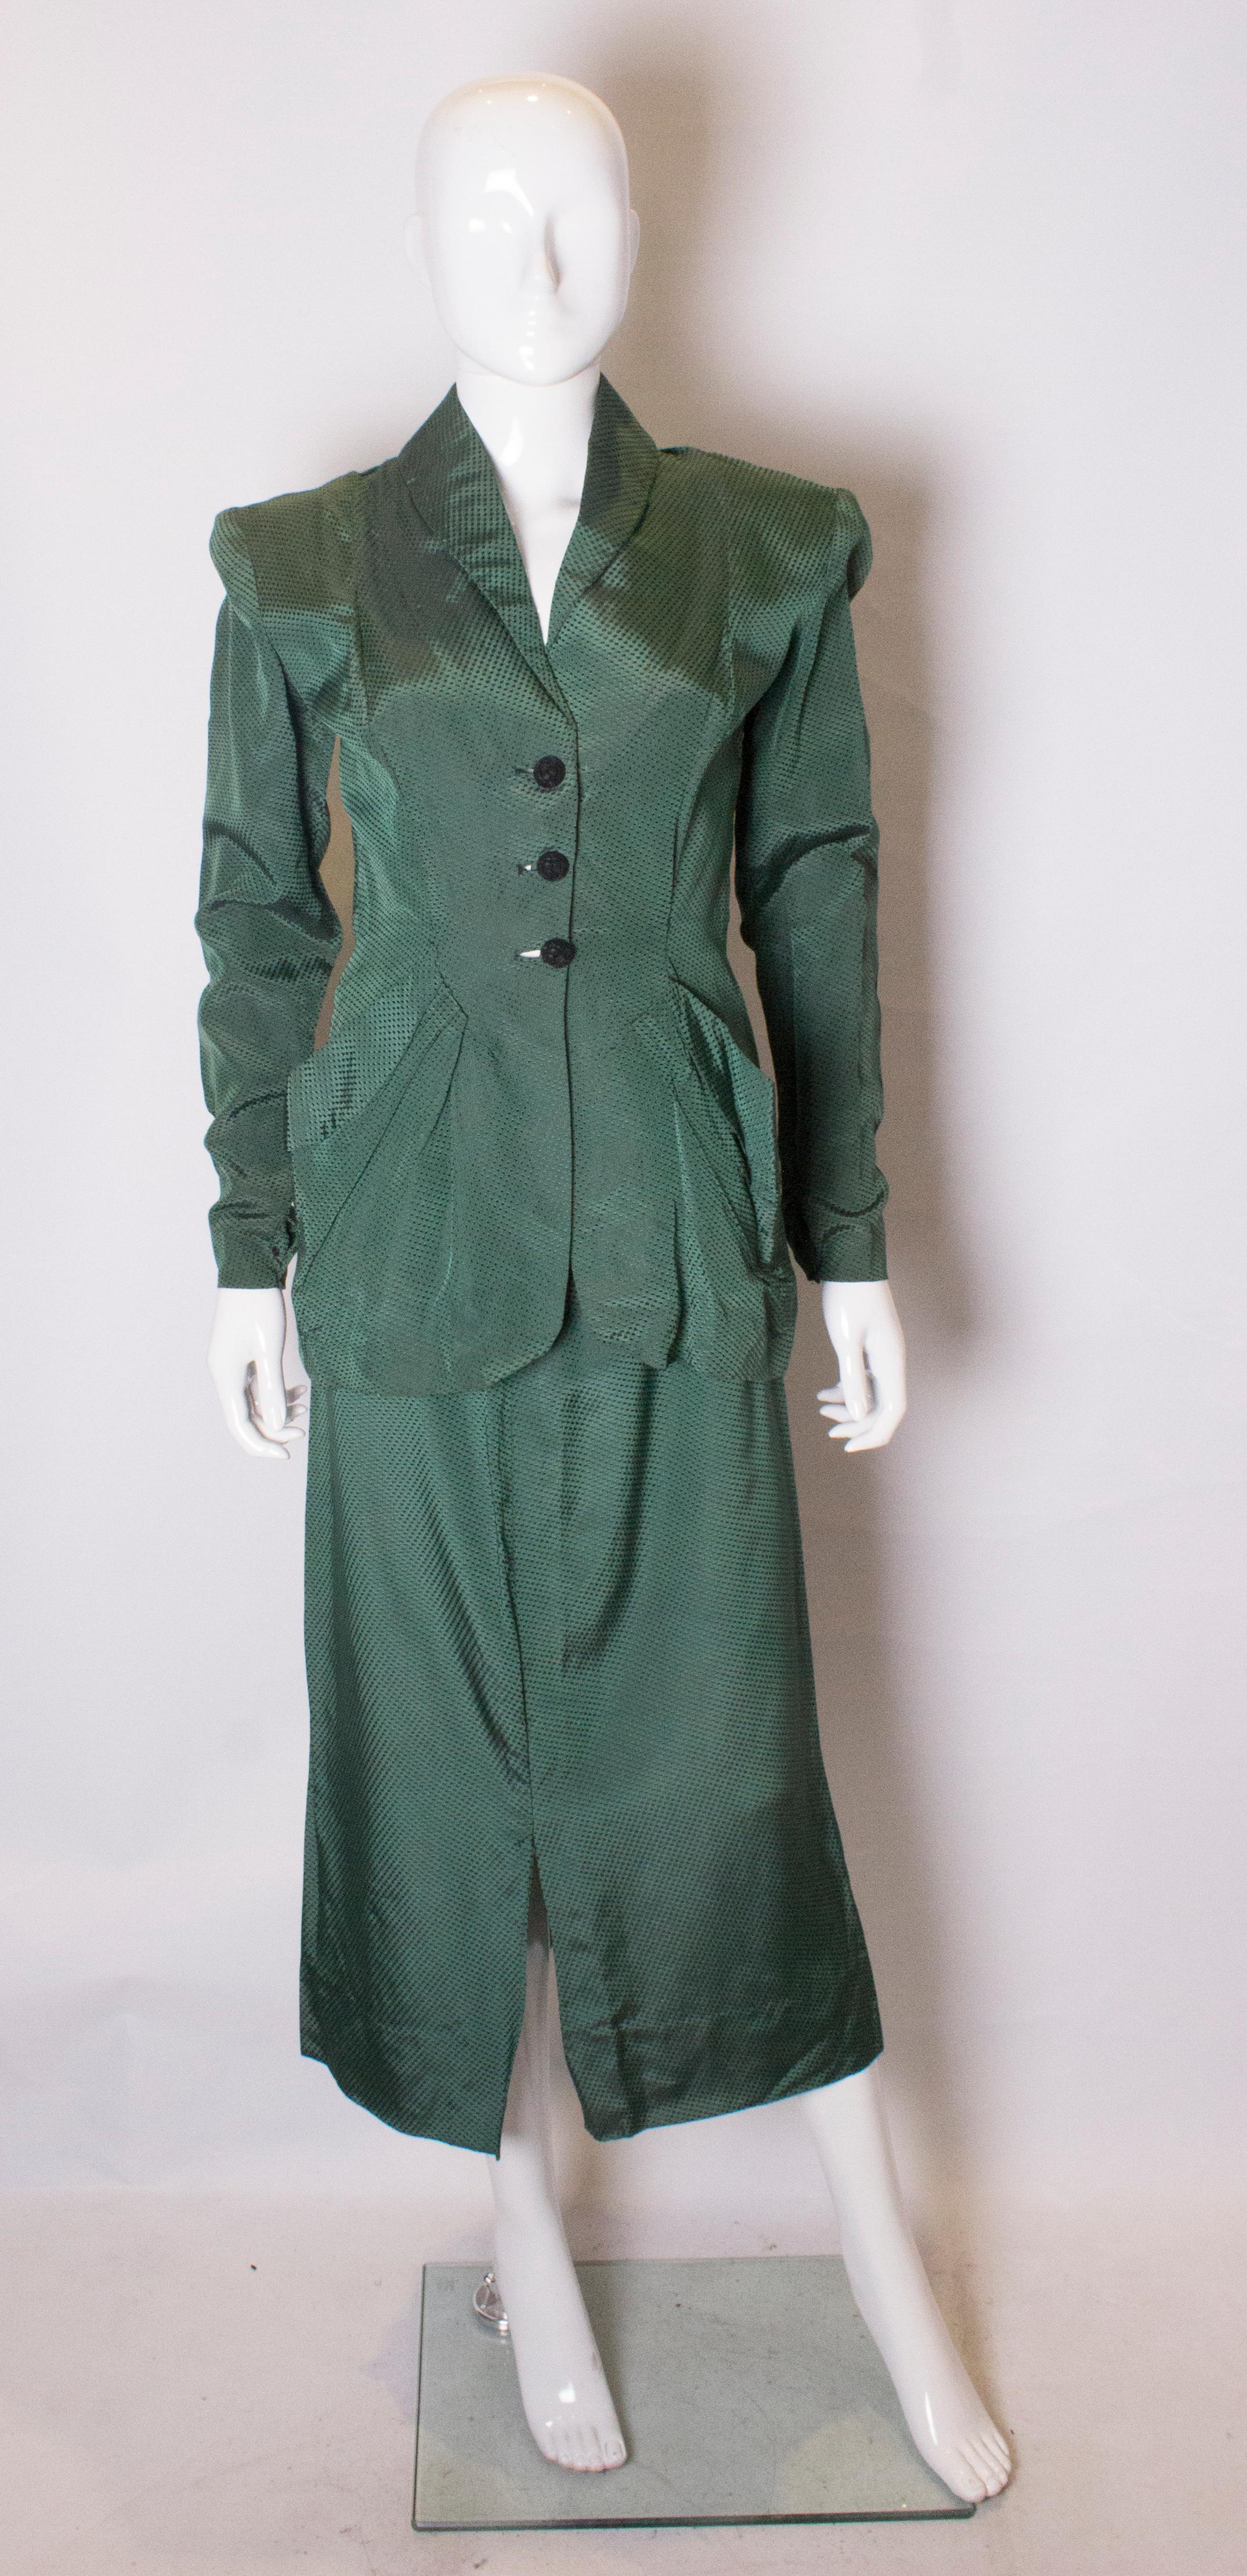 A chic vintage skirt suit  dating from the 1940s. The jacket has a three button front fastening, two pockets at the front,  and weights in the hem so it hangs well. 
The skirt  has a back central zip, and an 8 1/2 slit at the back and 11 '' slit at